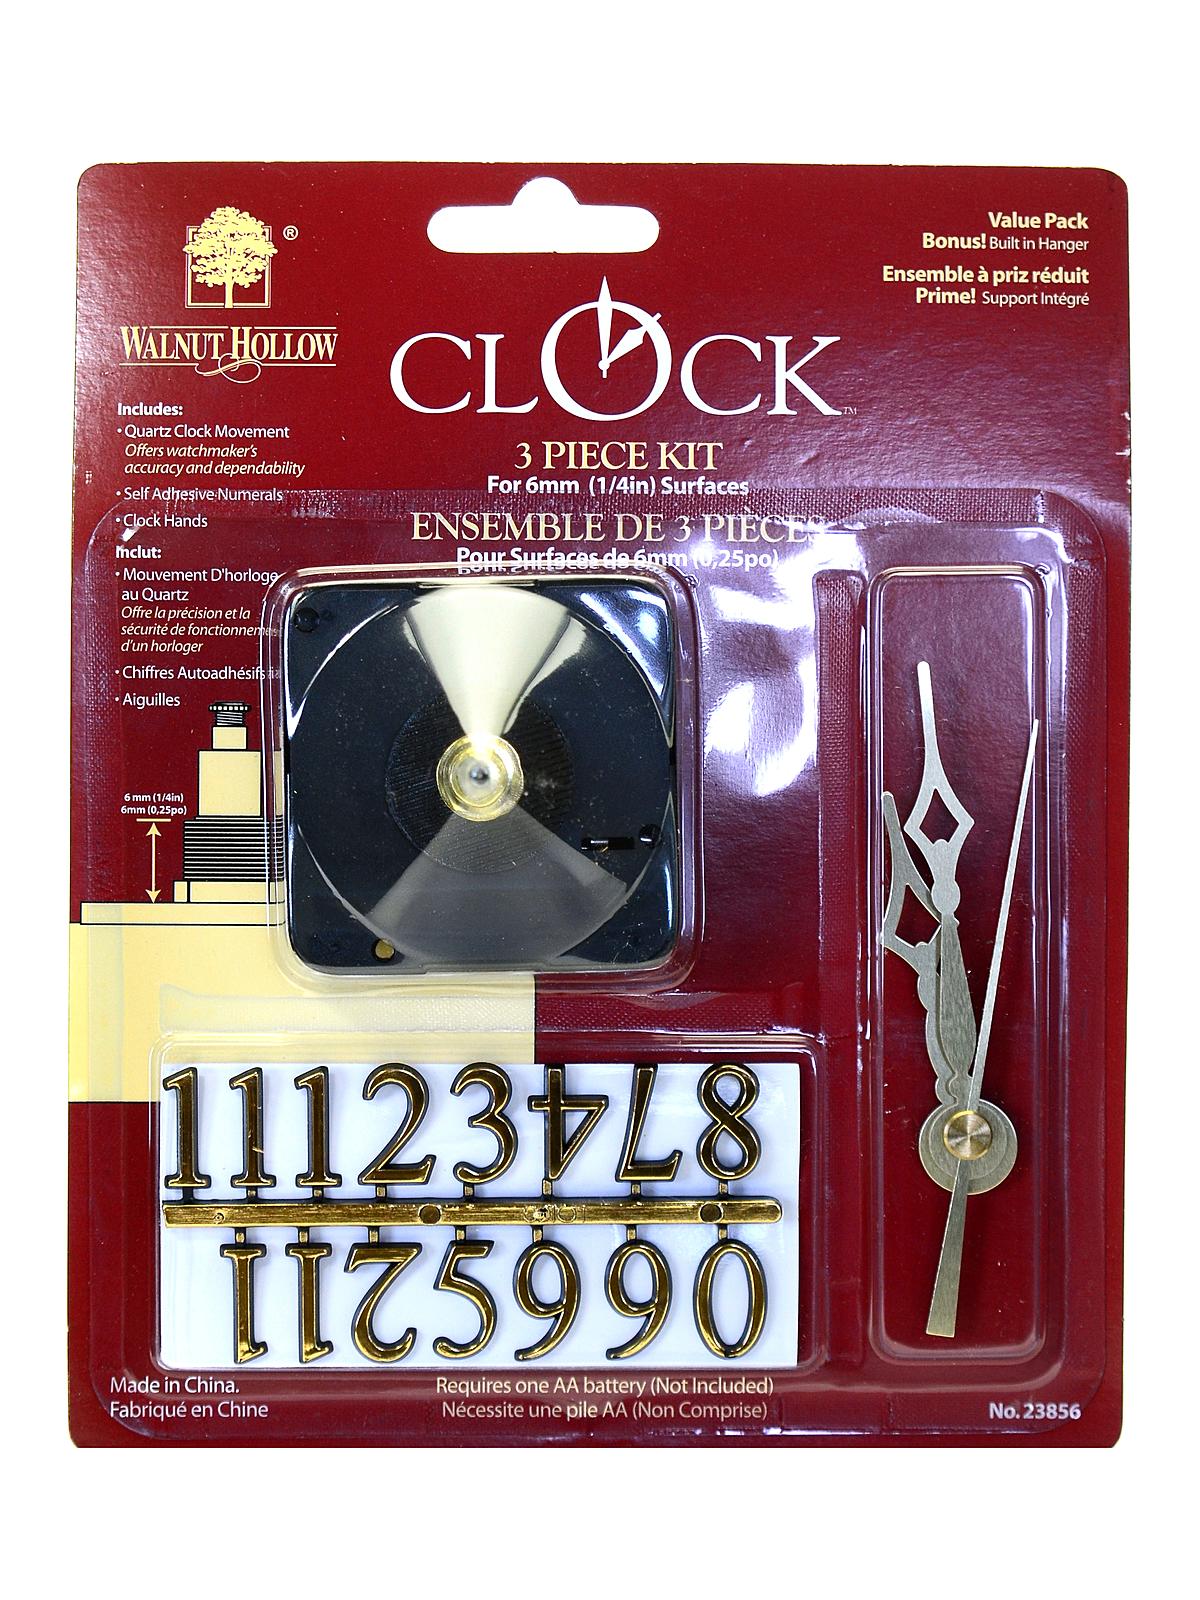 3 Piece Clock Kit For 1/4 in. Surface